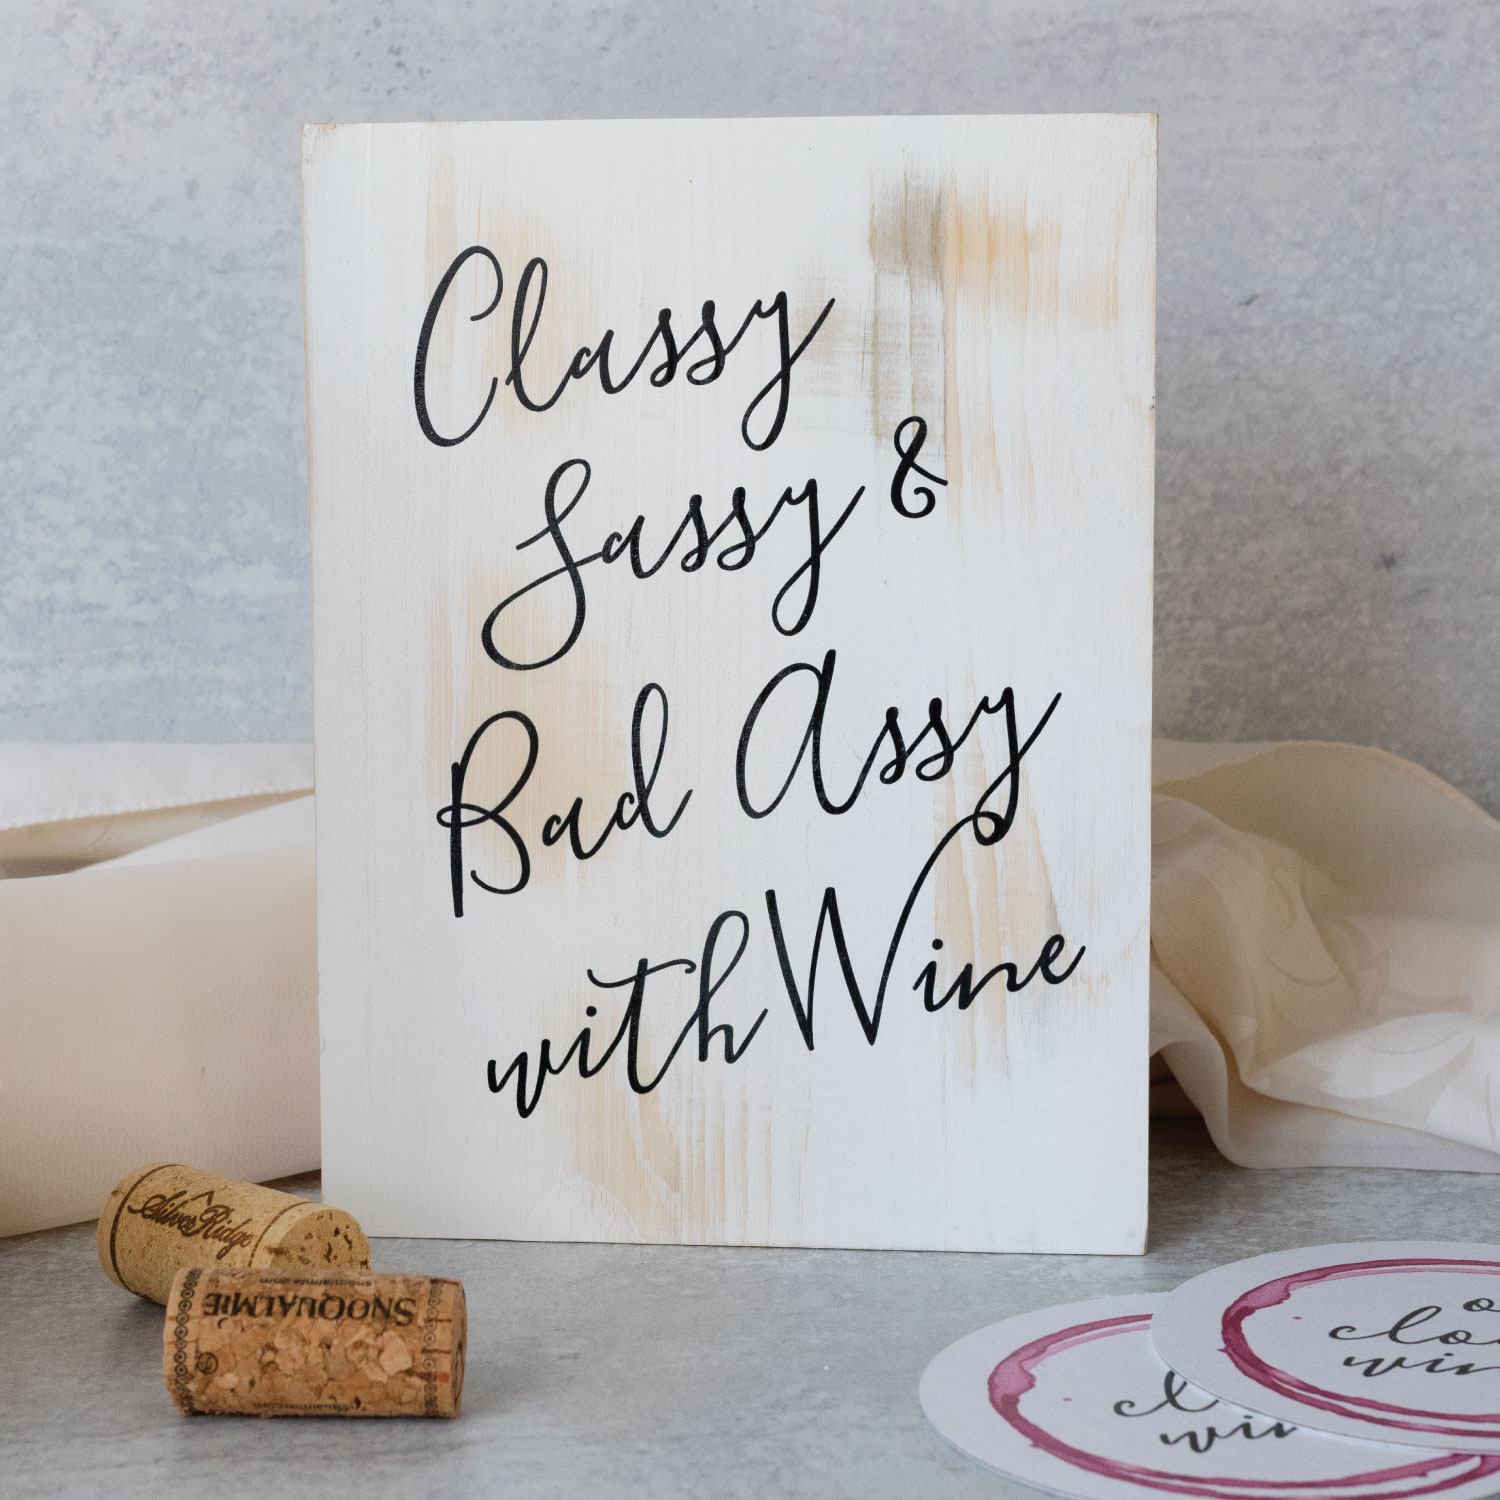 funny wooden wine sign reads classy sassy and bad assy with wine gift. Click to shop